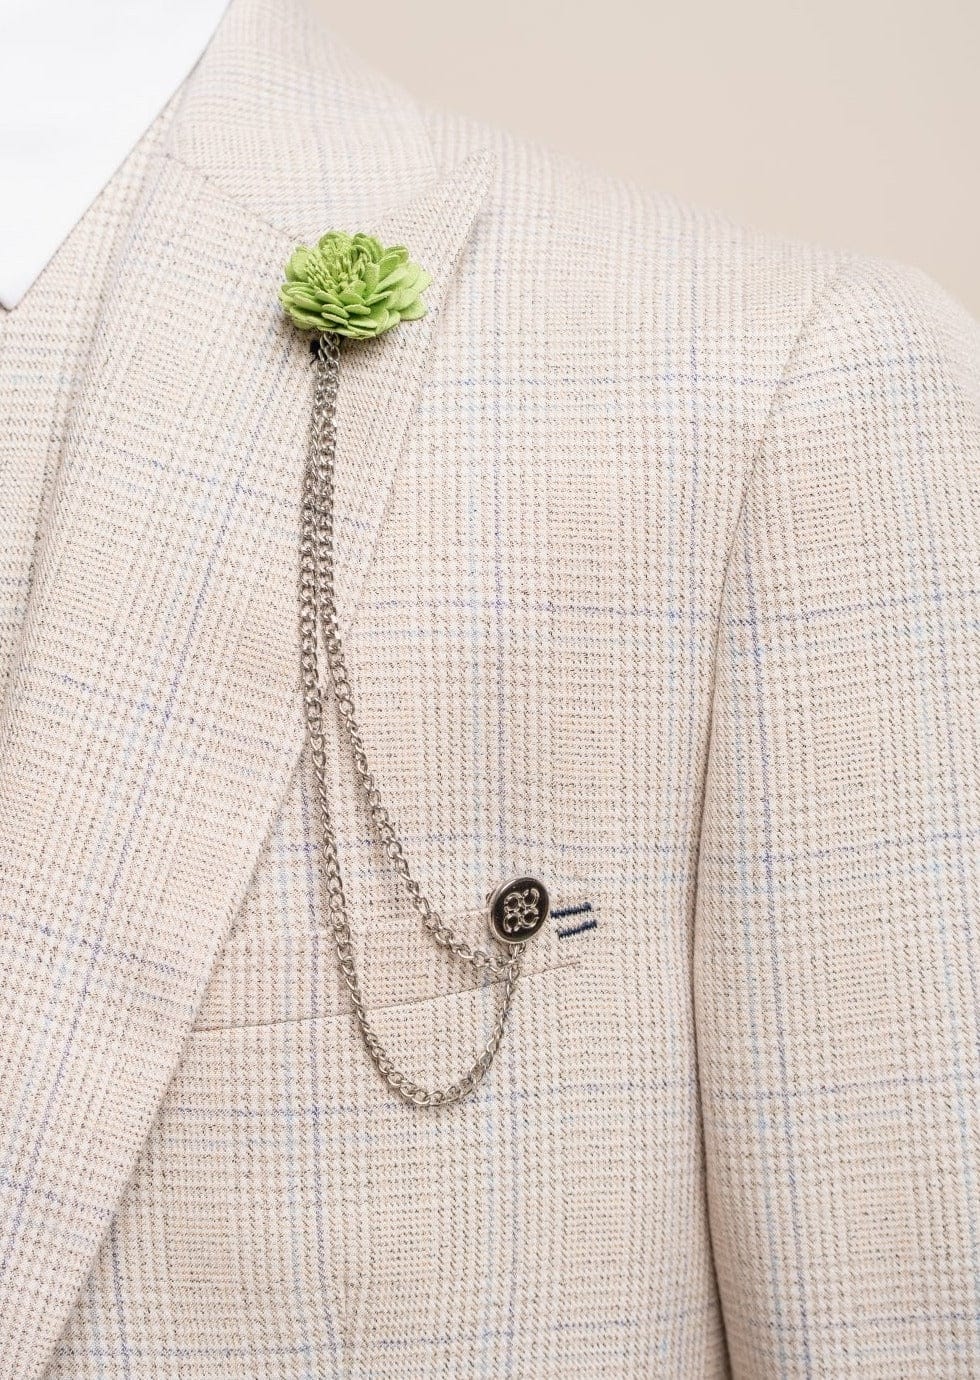 LIME GREEN FLOWER LAPEL PIN & CHAIN